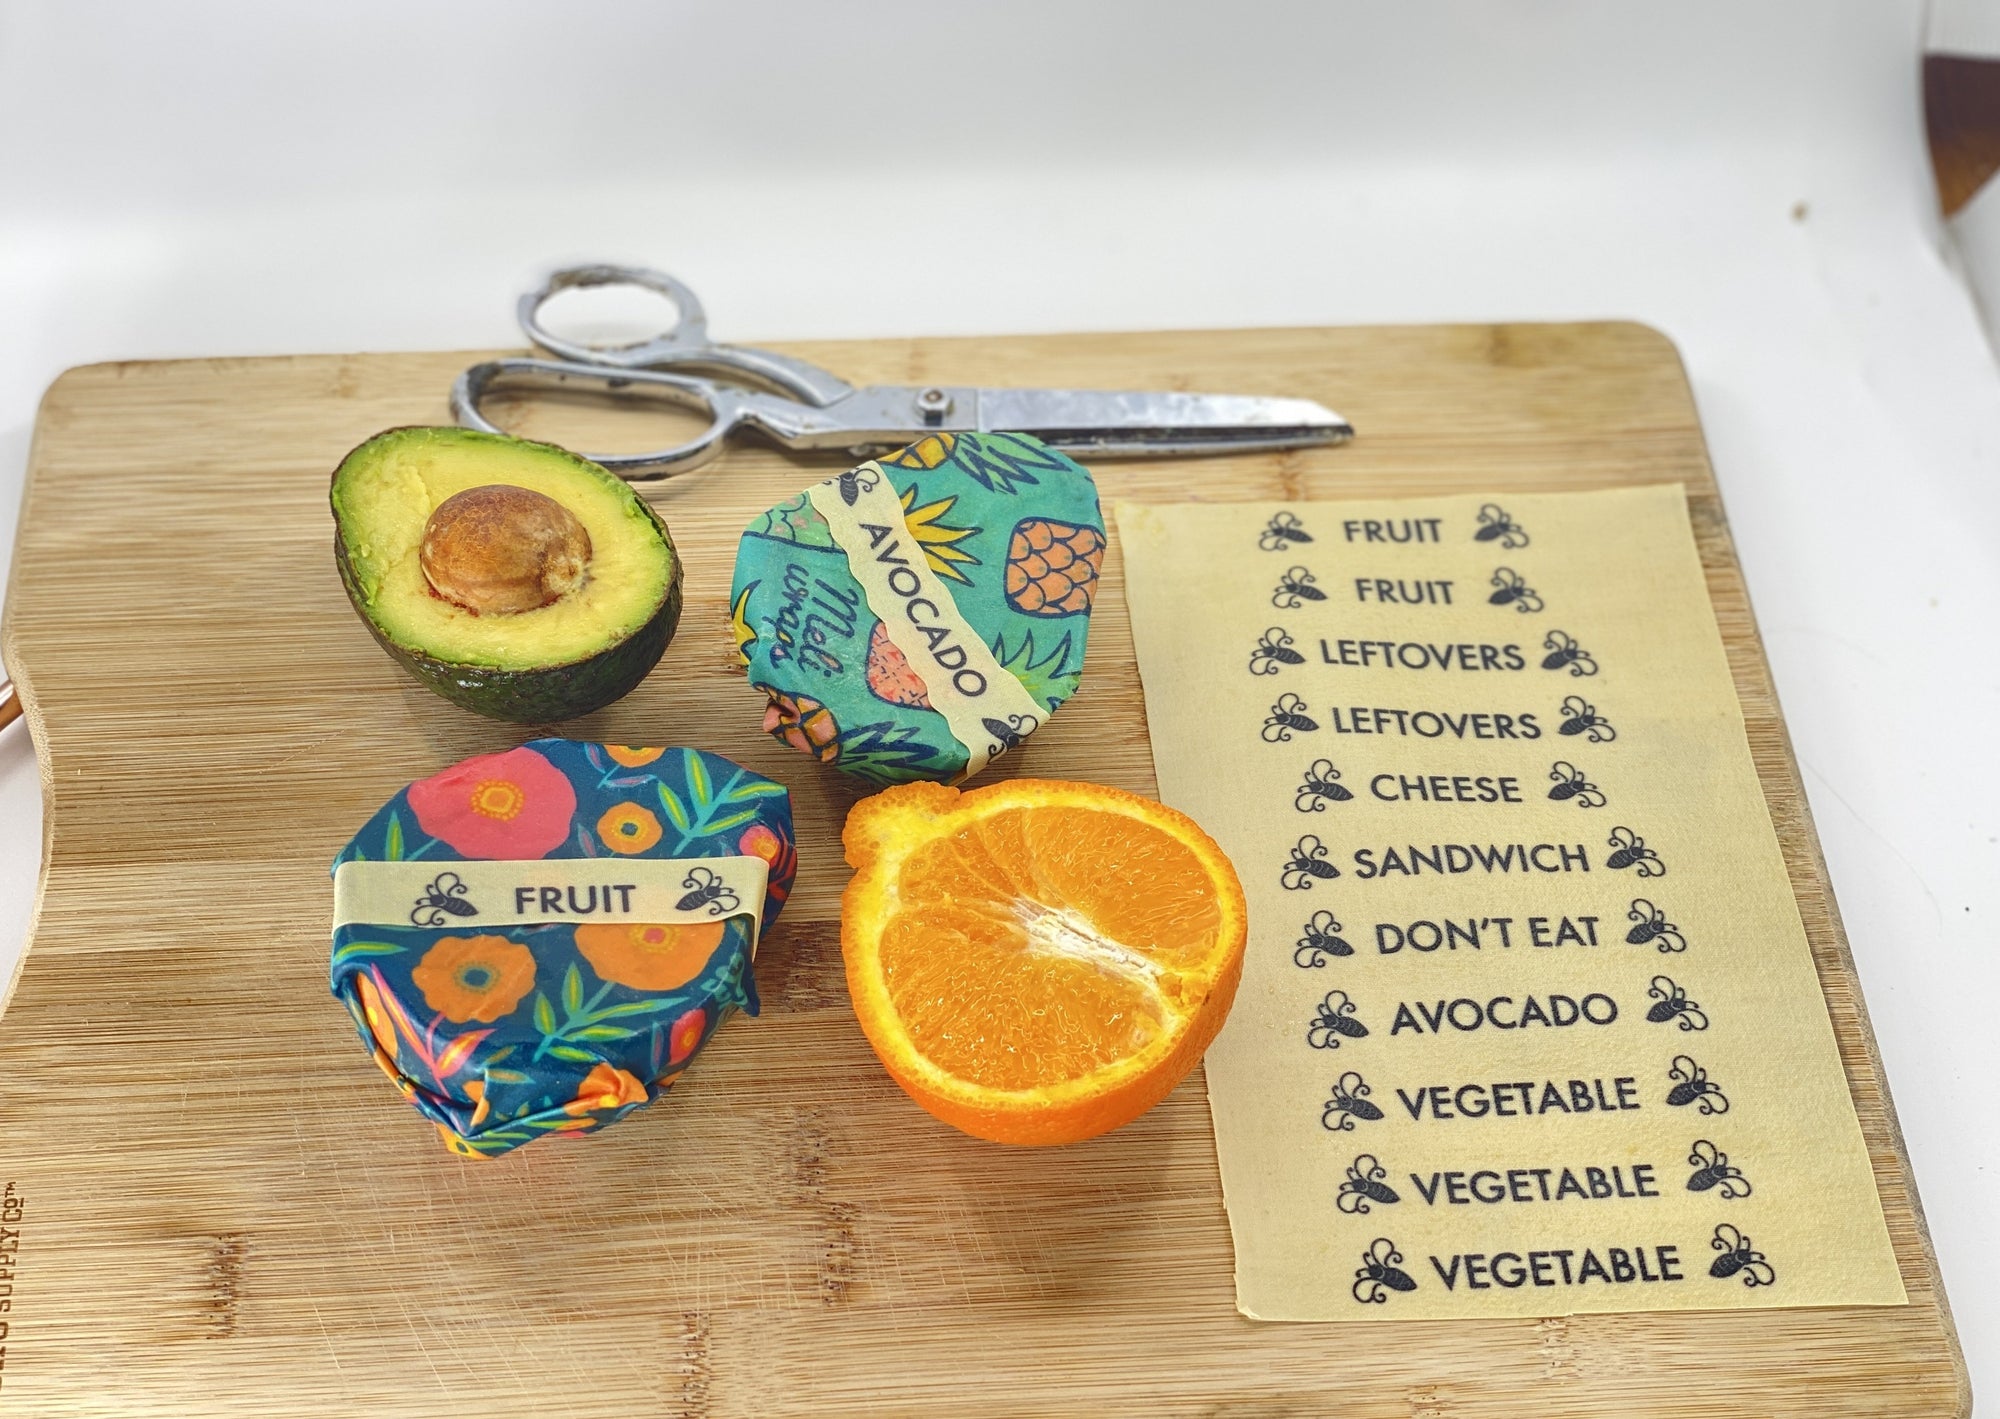 Buzz Words- Beeswax Wrap Food Labels